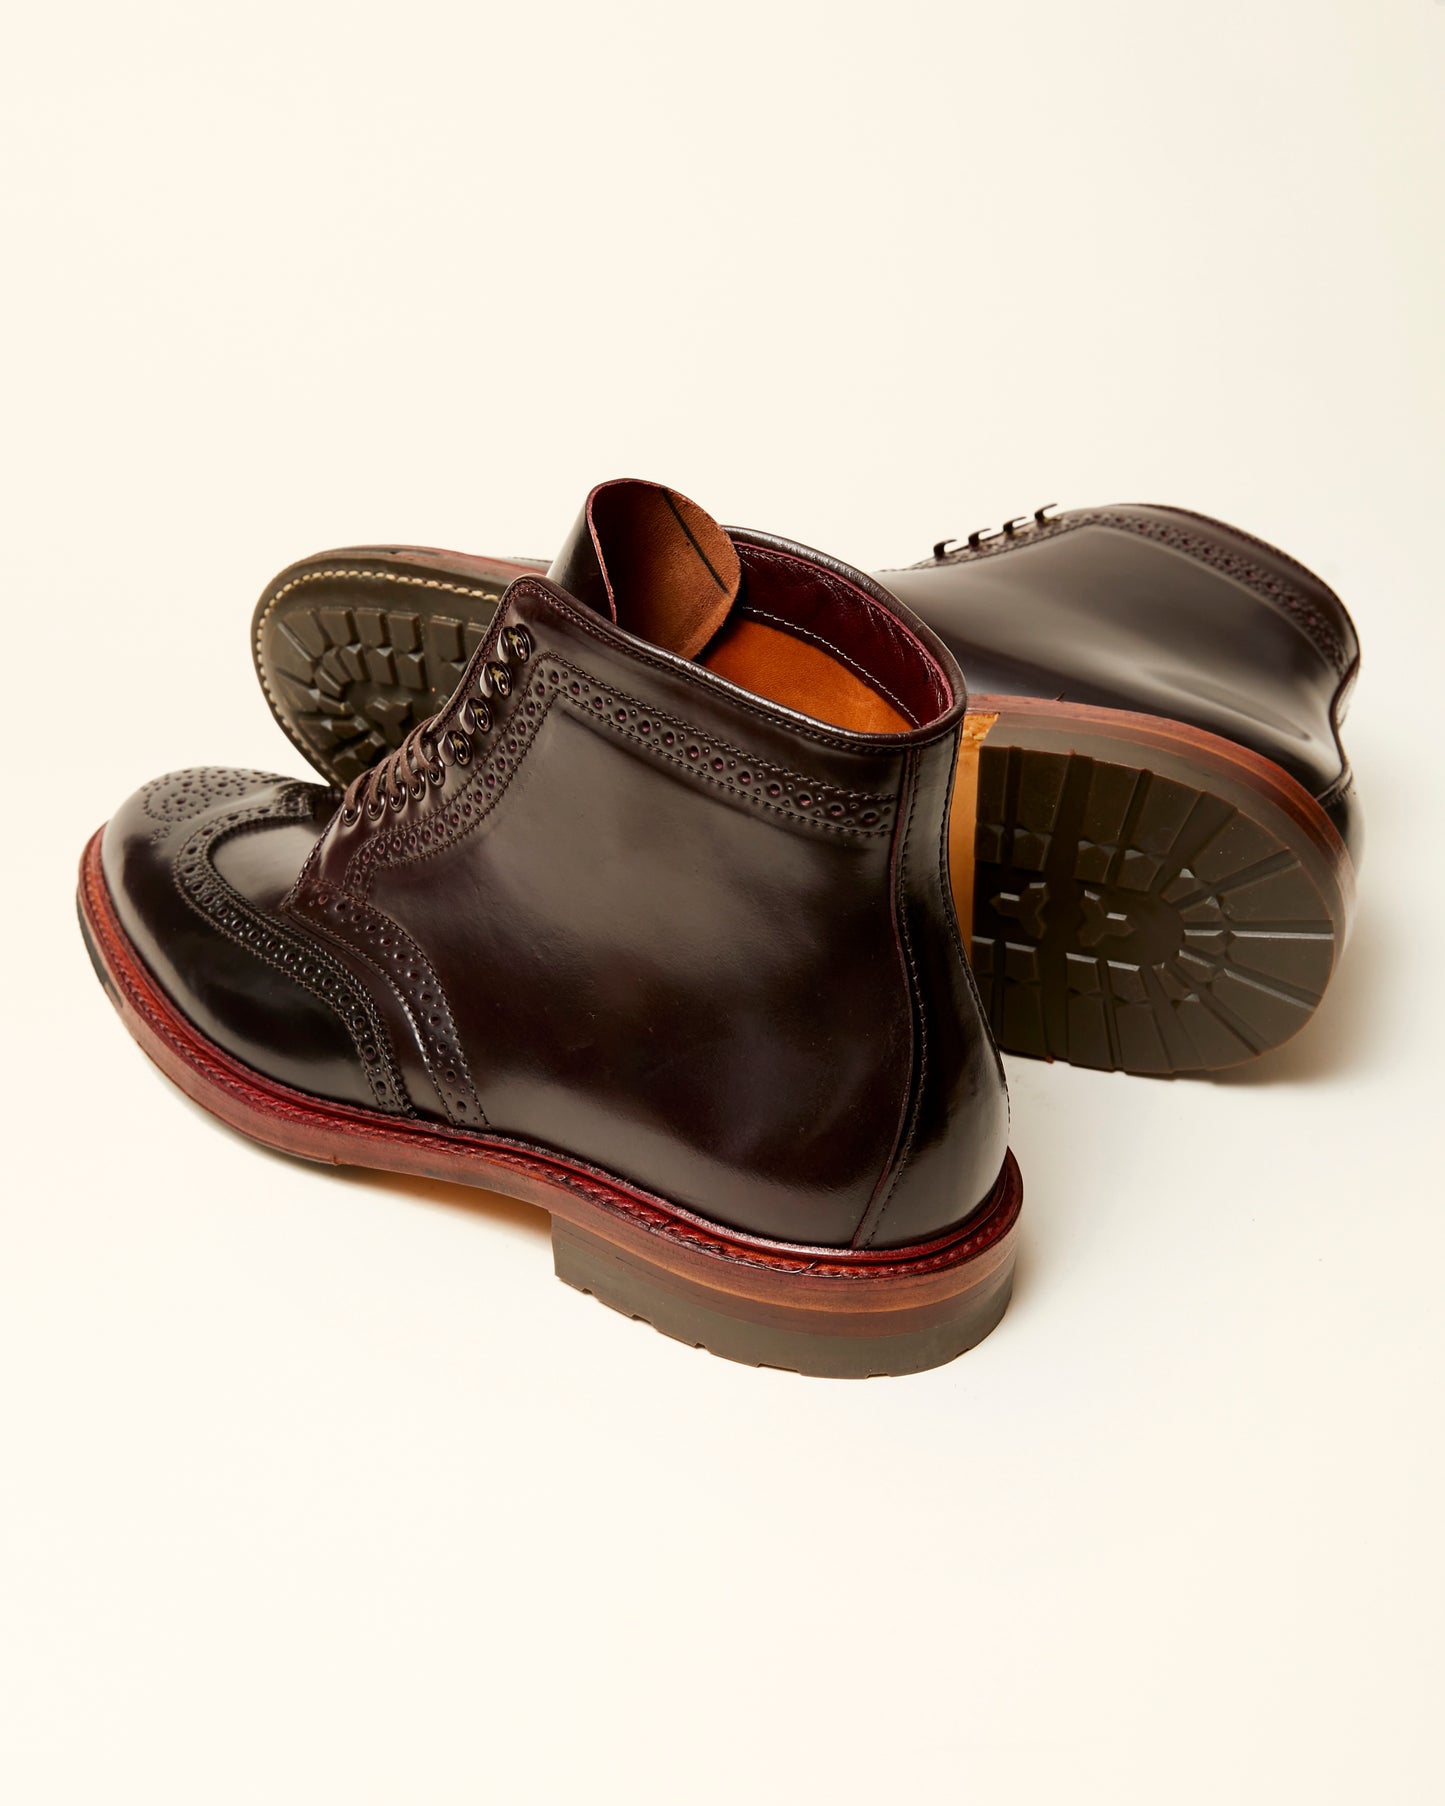 “Newcastle” Wing Tip Boot in Color 8 Shell Cordovan, Barrie Last